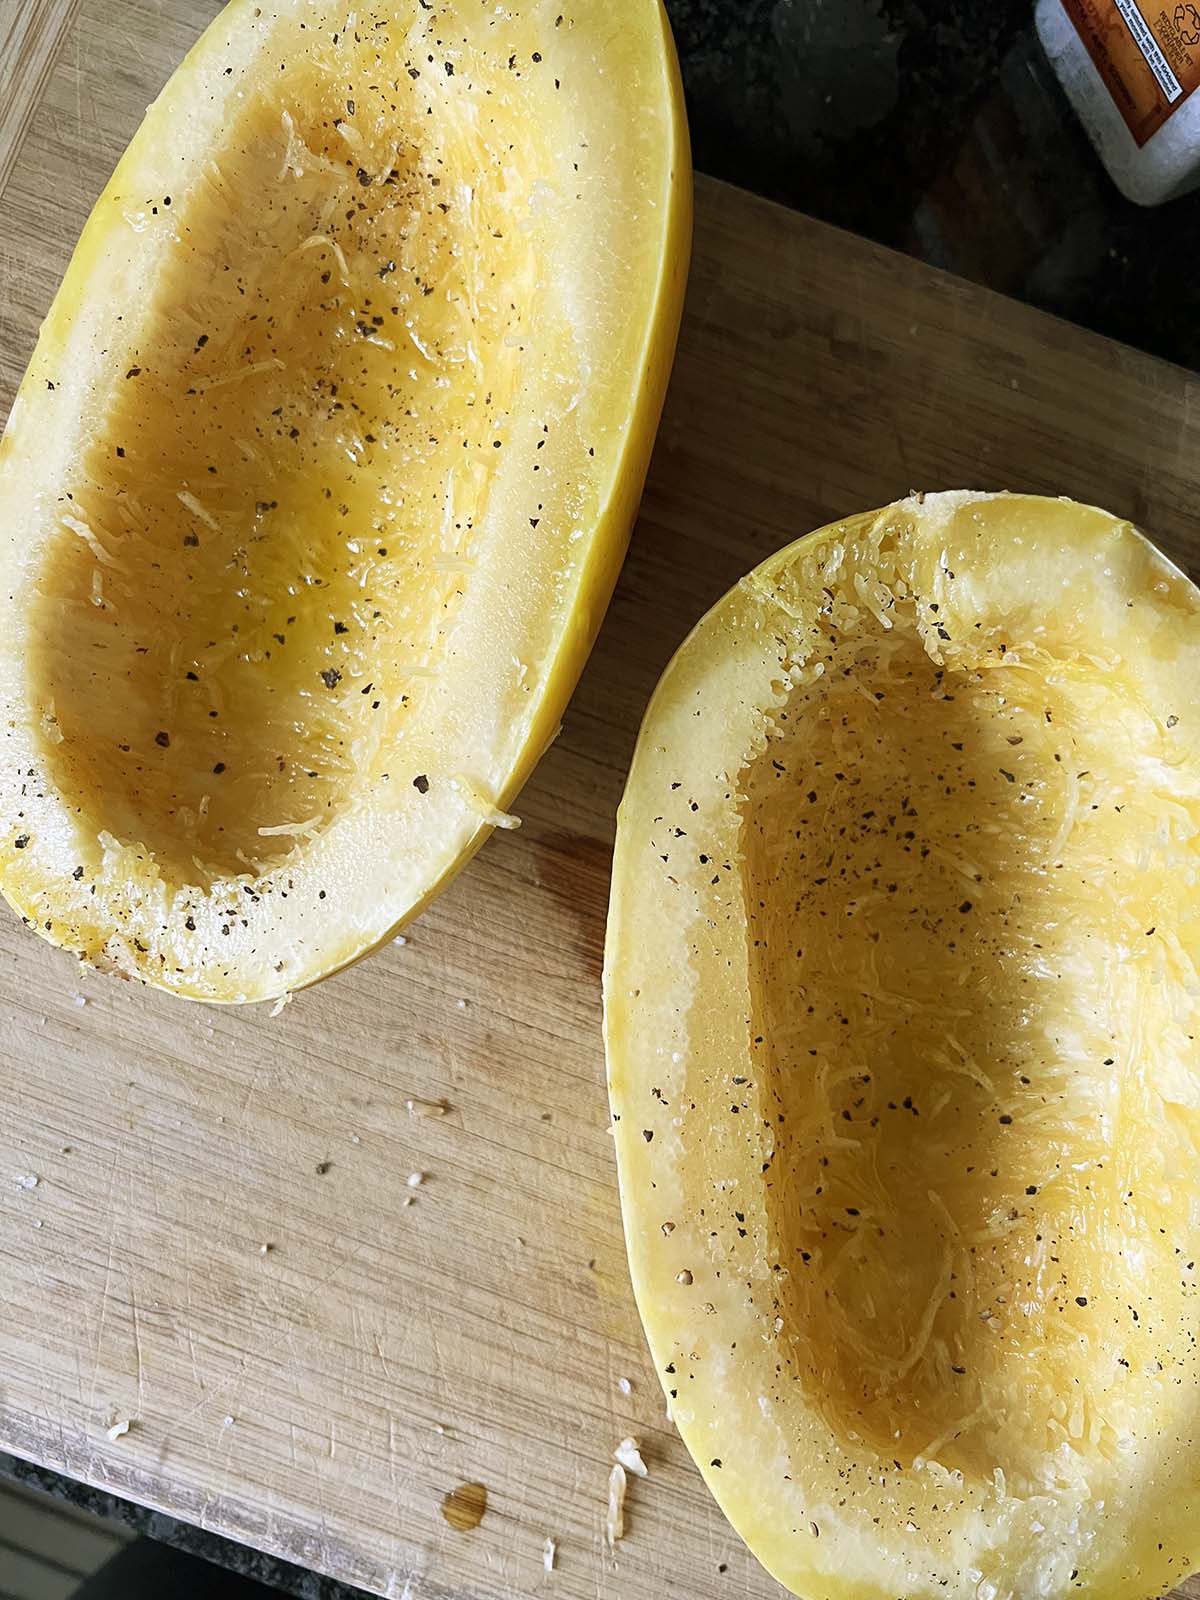 Scooping seeds out of spaghetti squash.